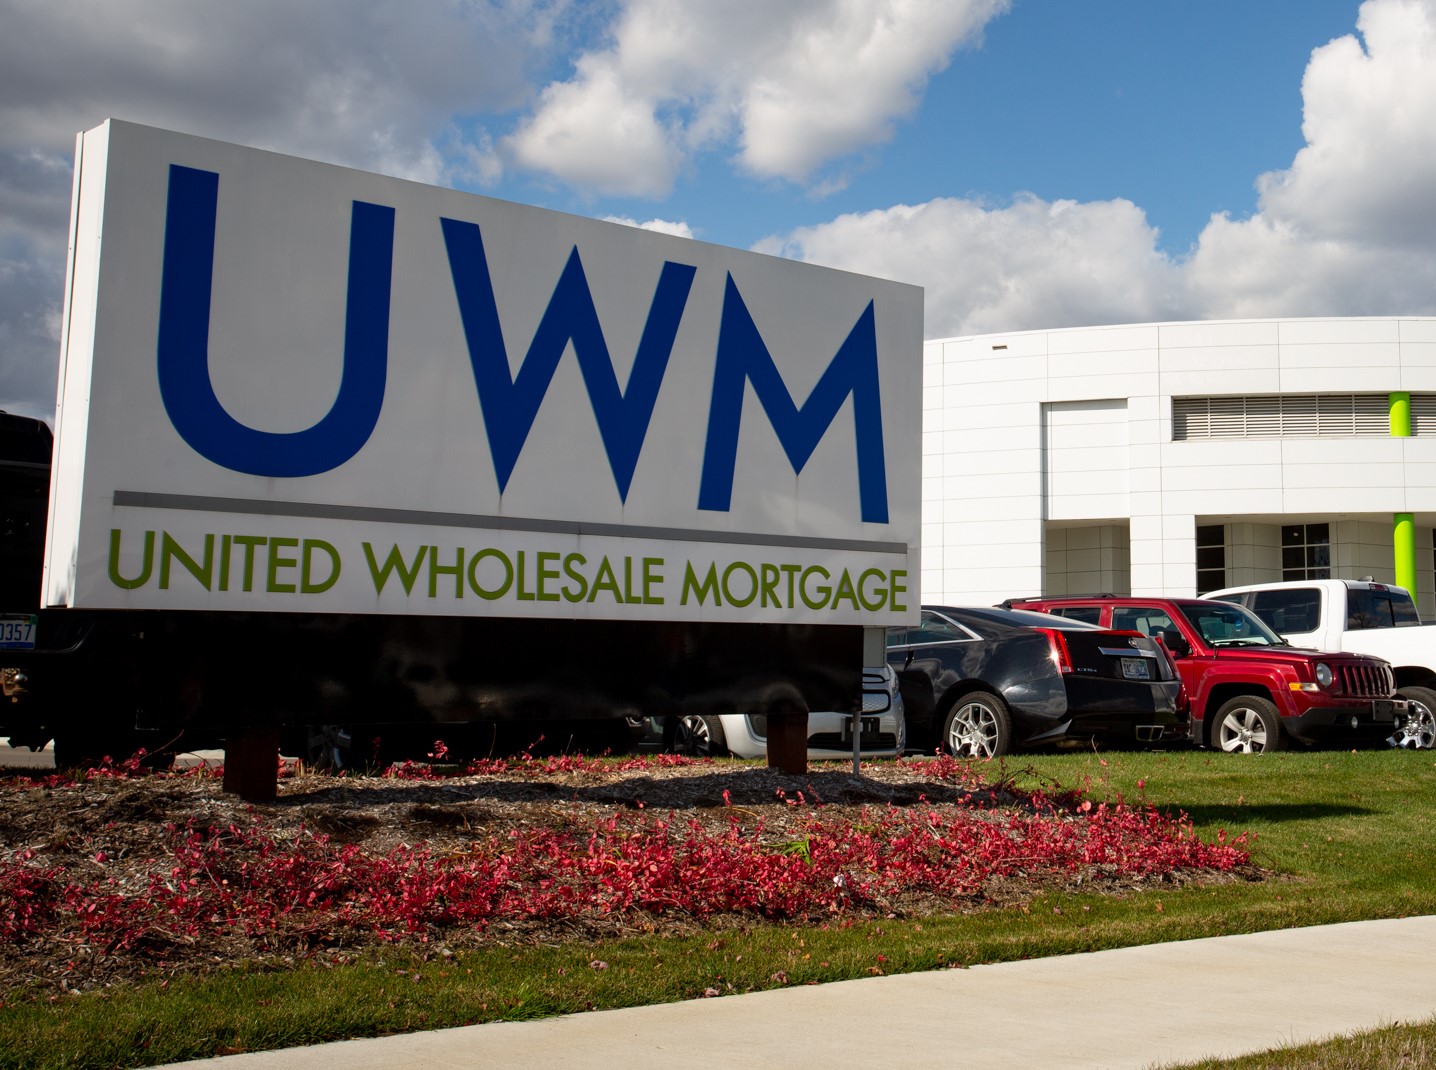 United Wholesale Mortgage Merger Deal Subject Of Class Action Complaint